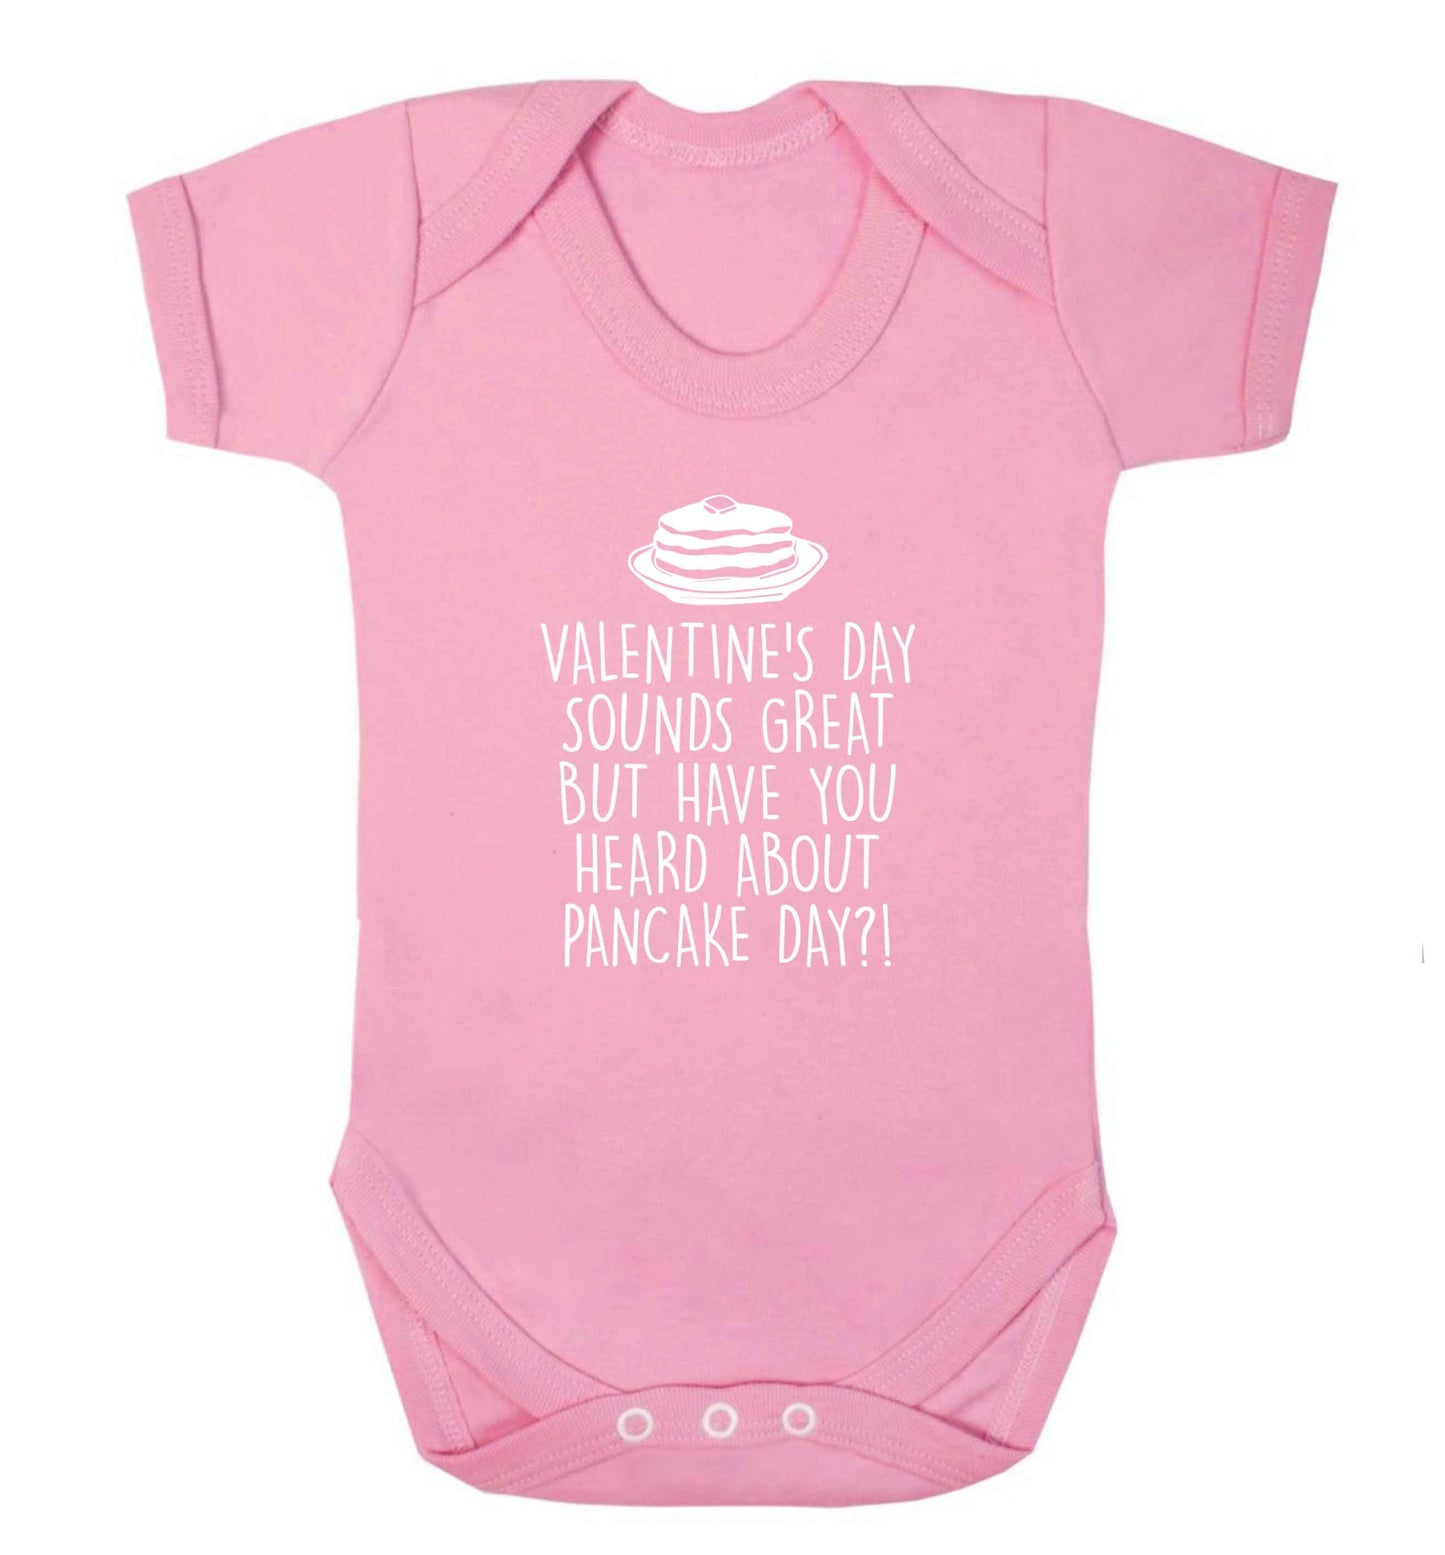 Valentine's day sounds great but have you heard about pancake day?! baby vest pale pink 18-24 months